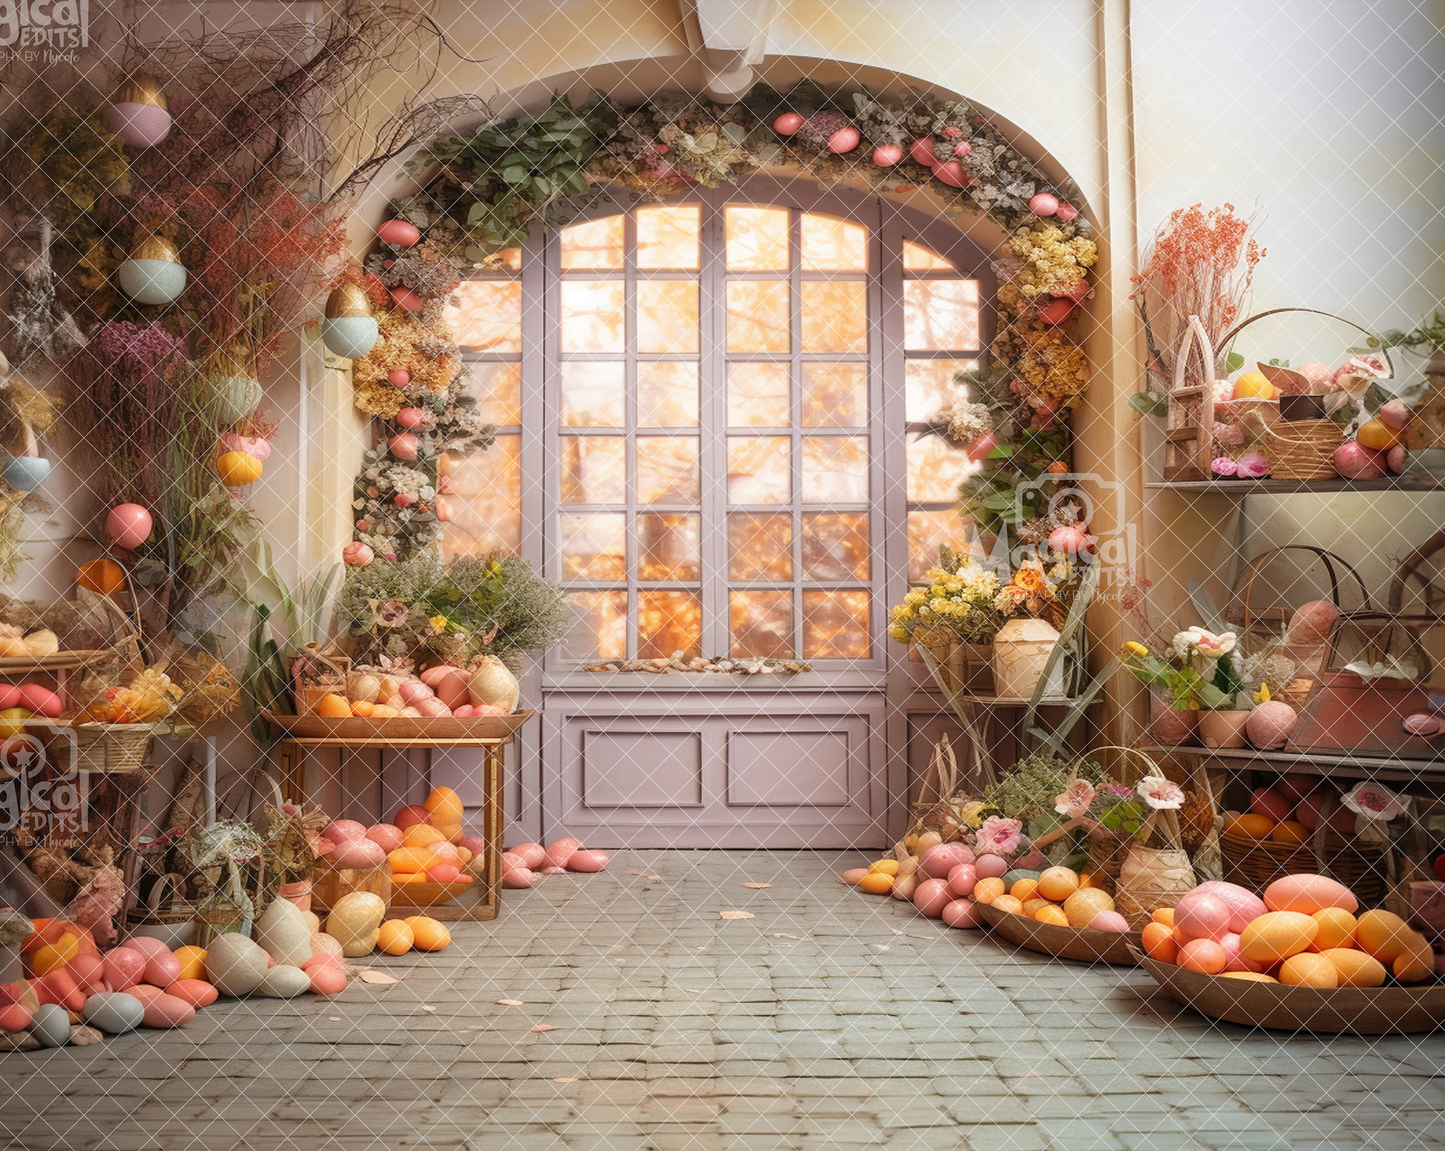 EASTER ARCH - Nycole Evans | Guest Designer